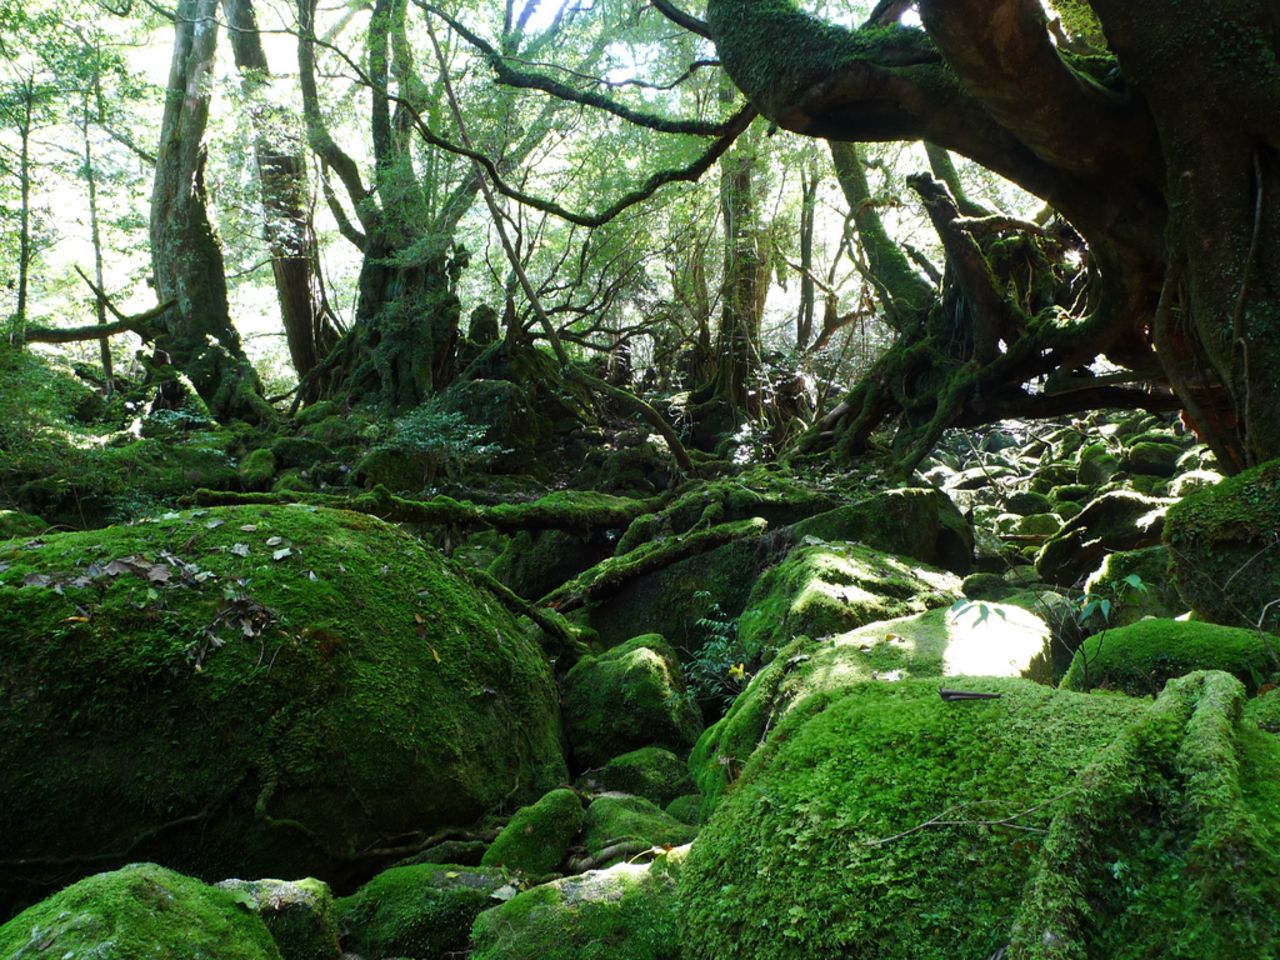 Off the southern coast of Kyushu, Yakushima offers visitors ancient forests and mountains that look straight out of a magical Studio Ghibli production. The oldest ceder tree on the island is thought to be over 7,000 years old.